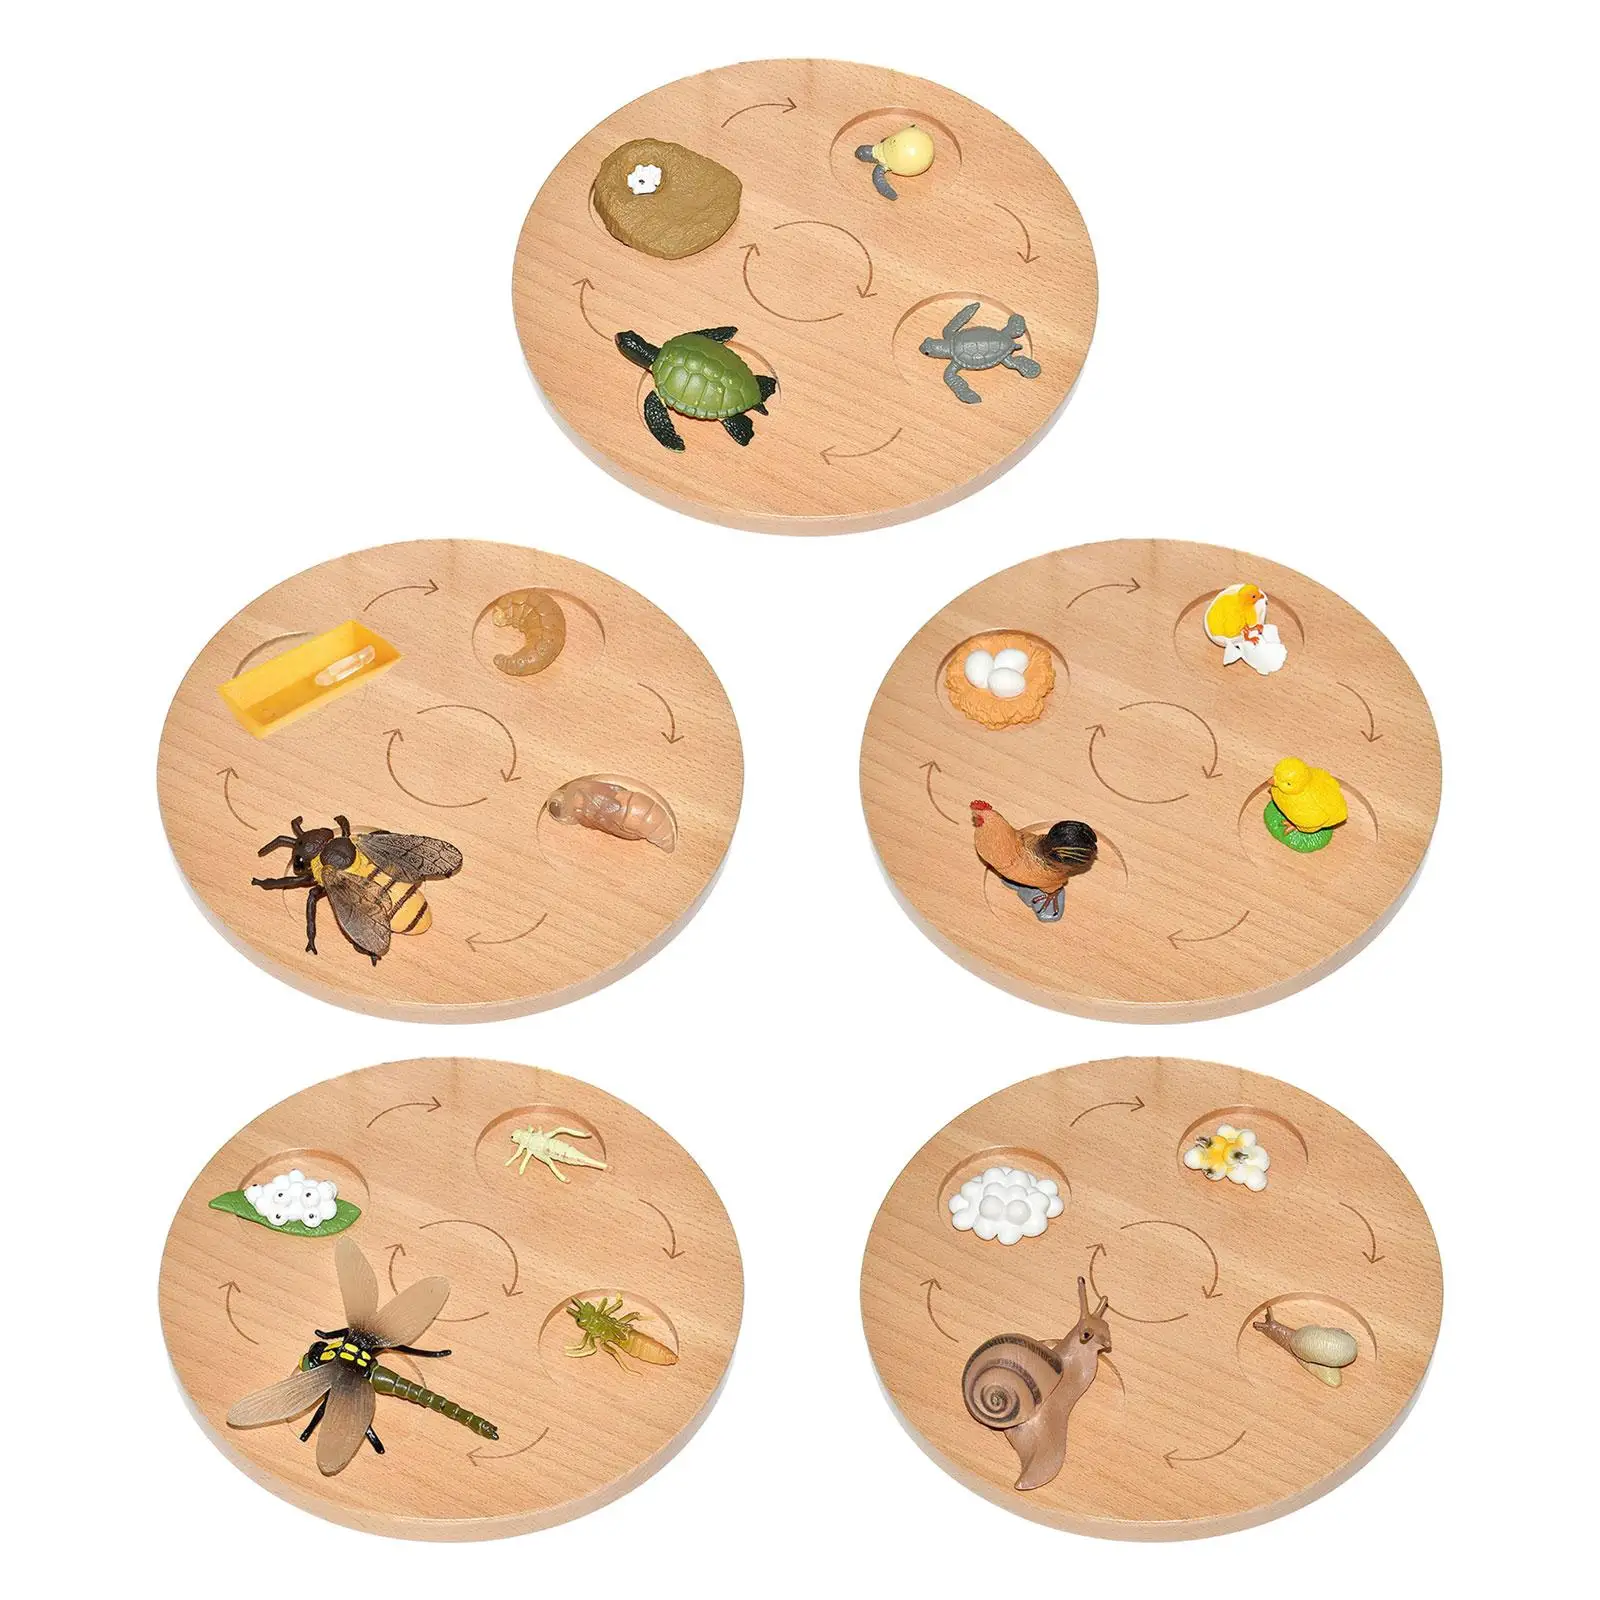 

Life Cycle Tray Teaching Aids Science Realistic Early Learning for Boys Girls Animal Growth Cycle Figures Montessori Toys